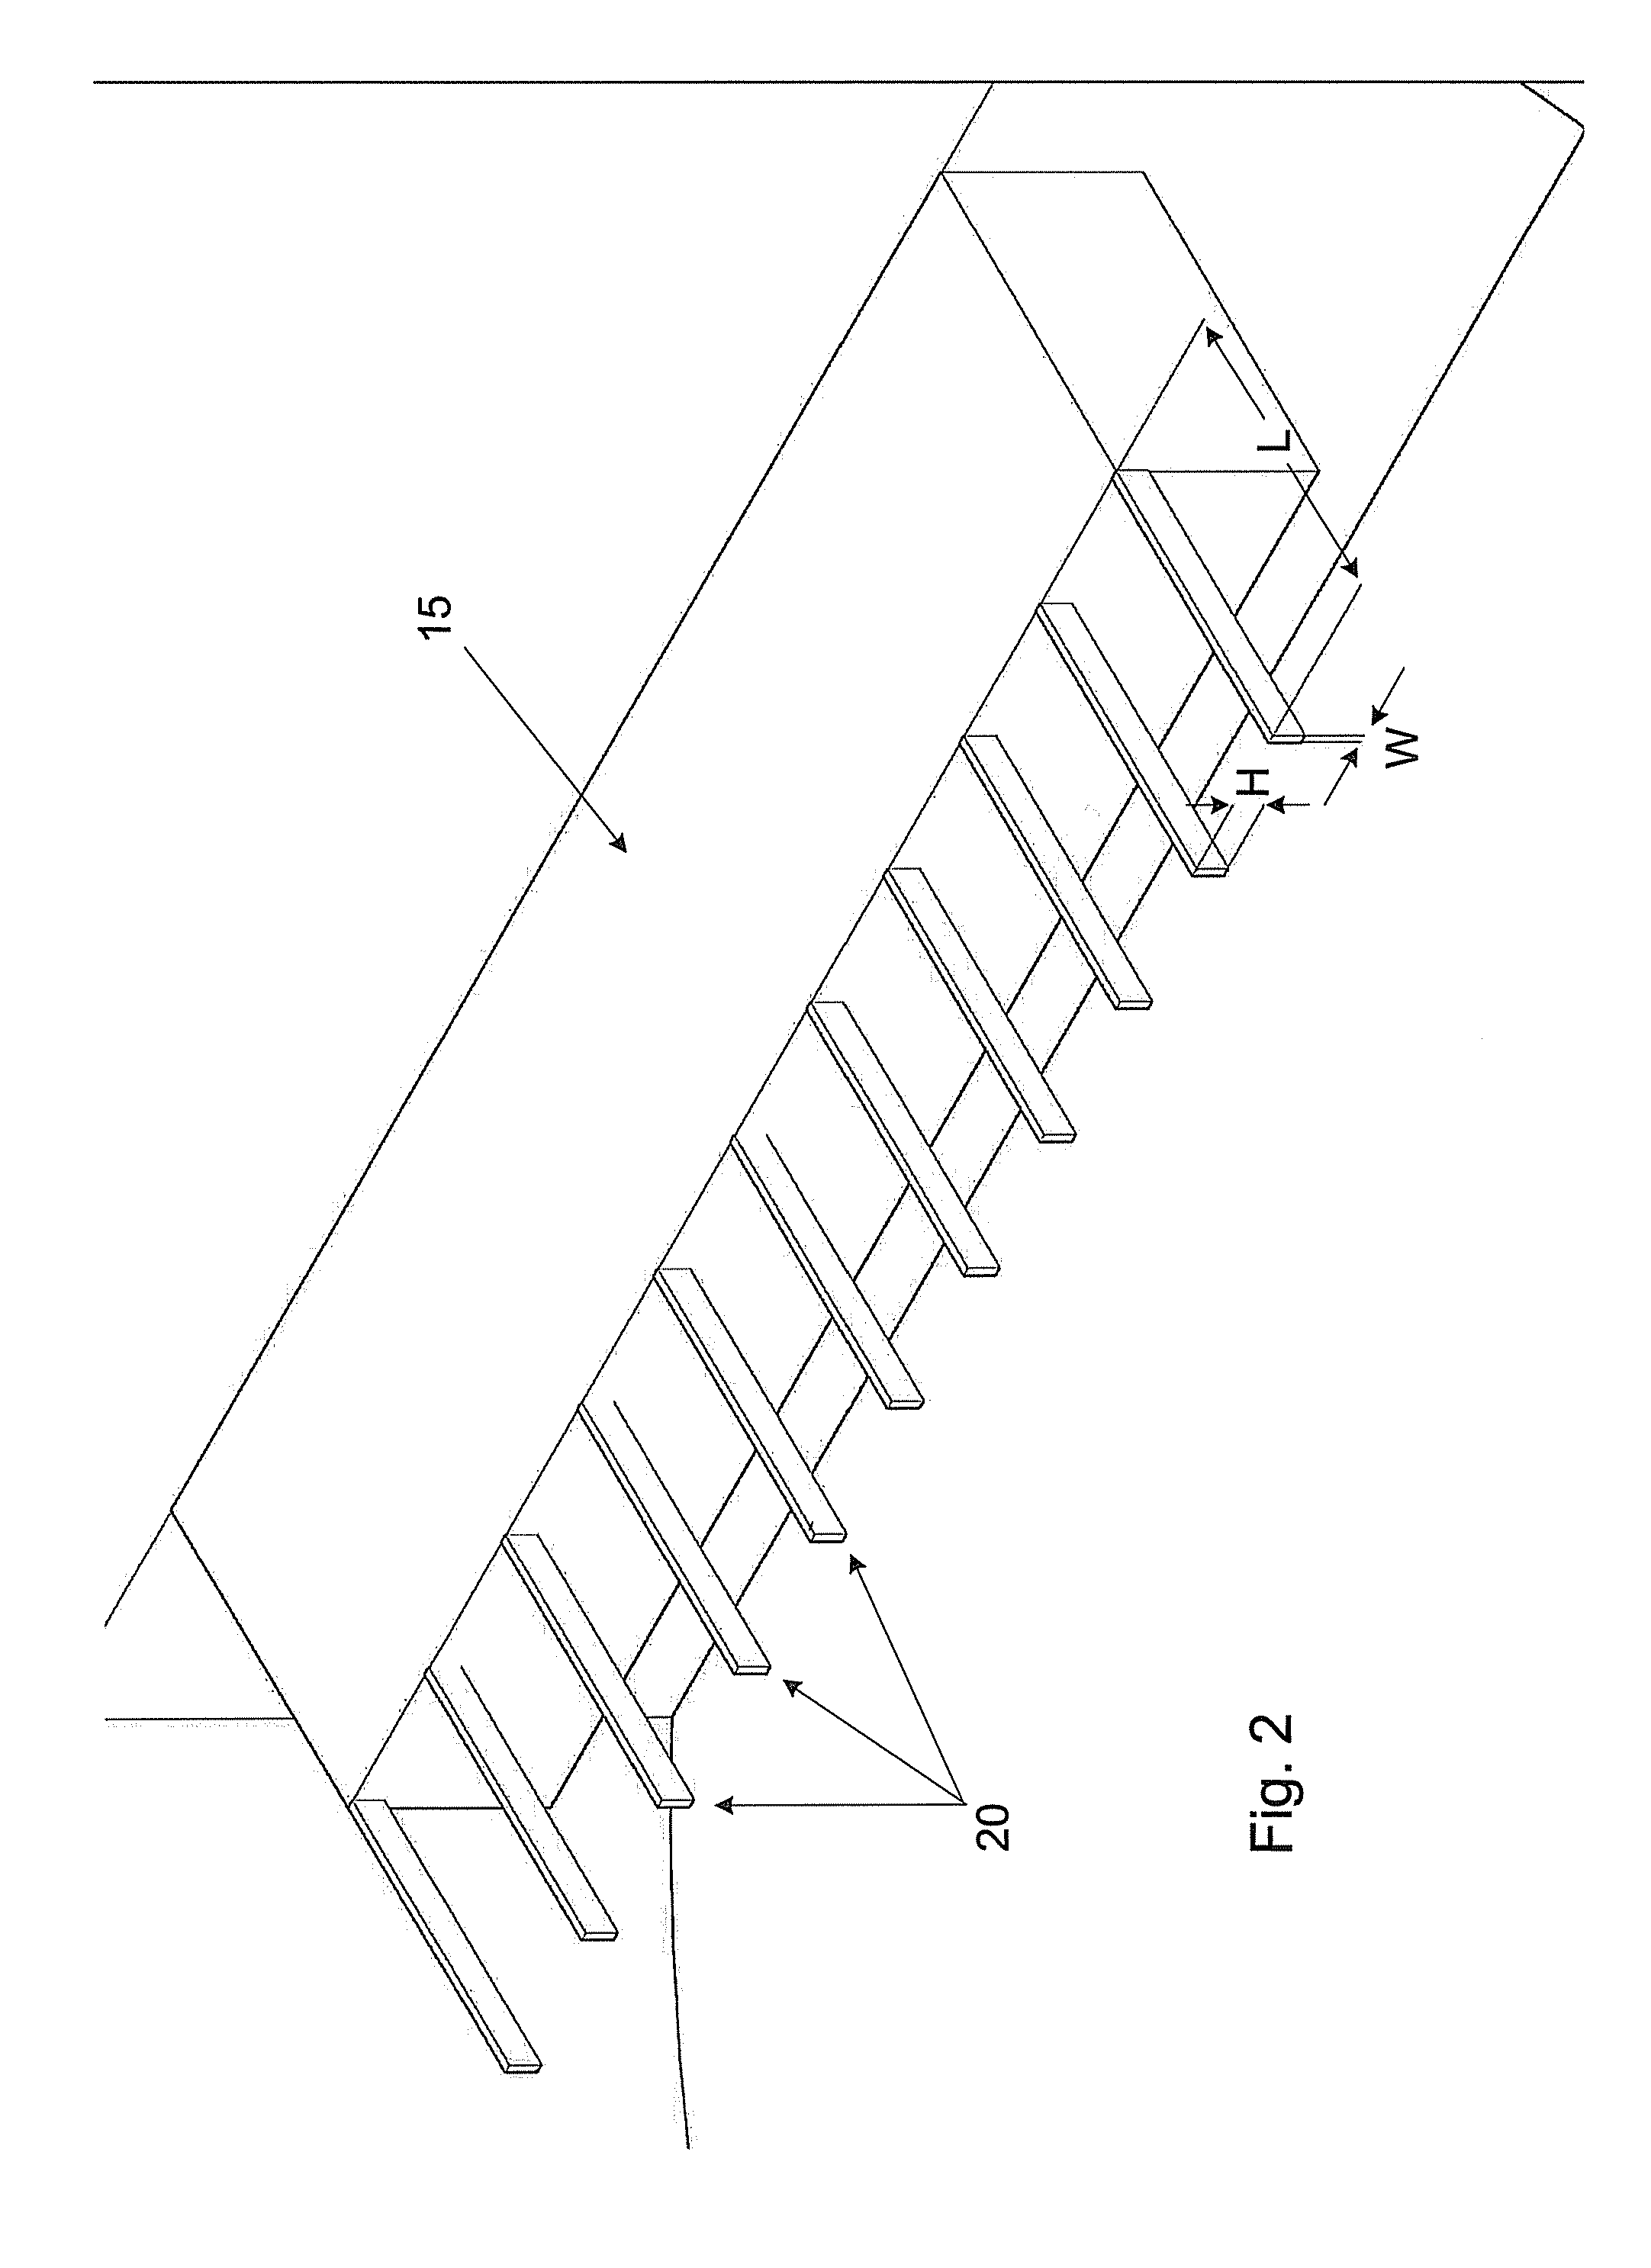 Devices, apparatus, and methods employing biomimetic cilia for microfluidic manipulation